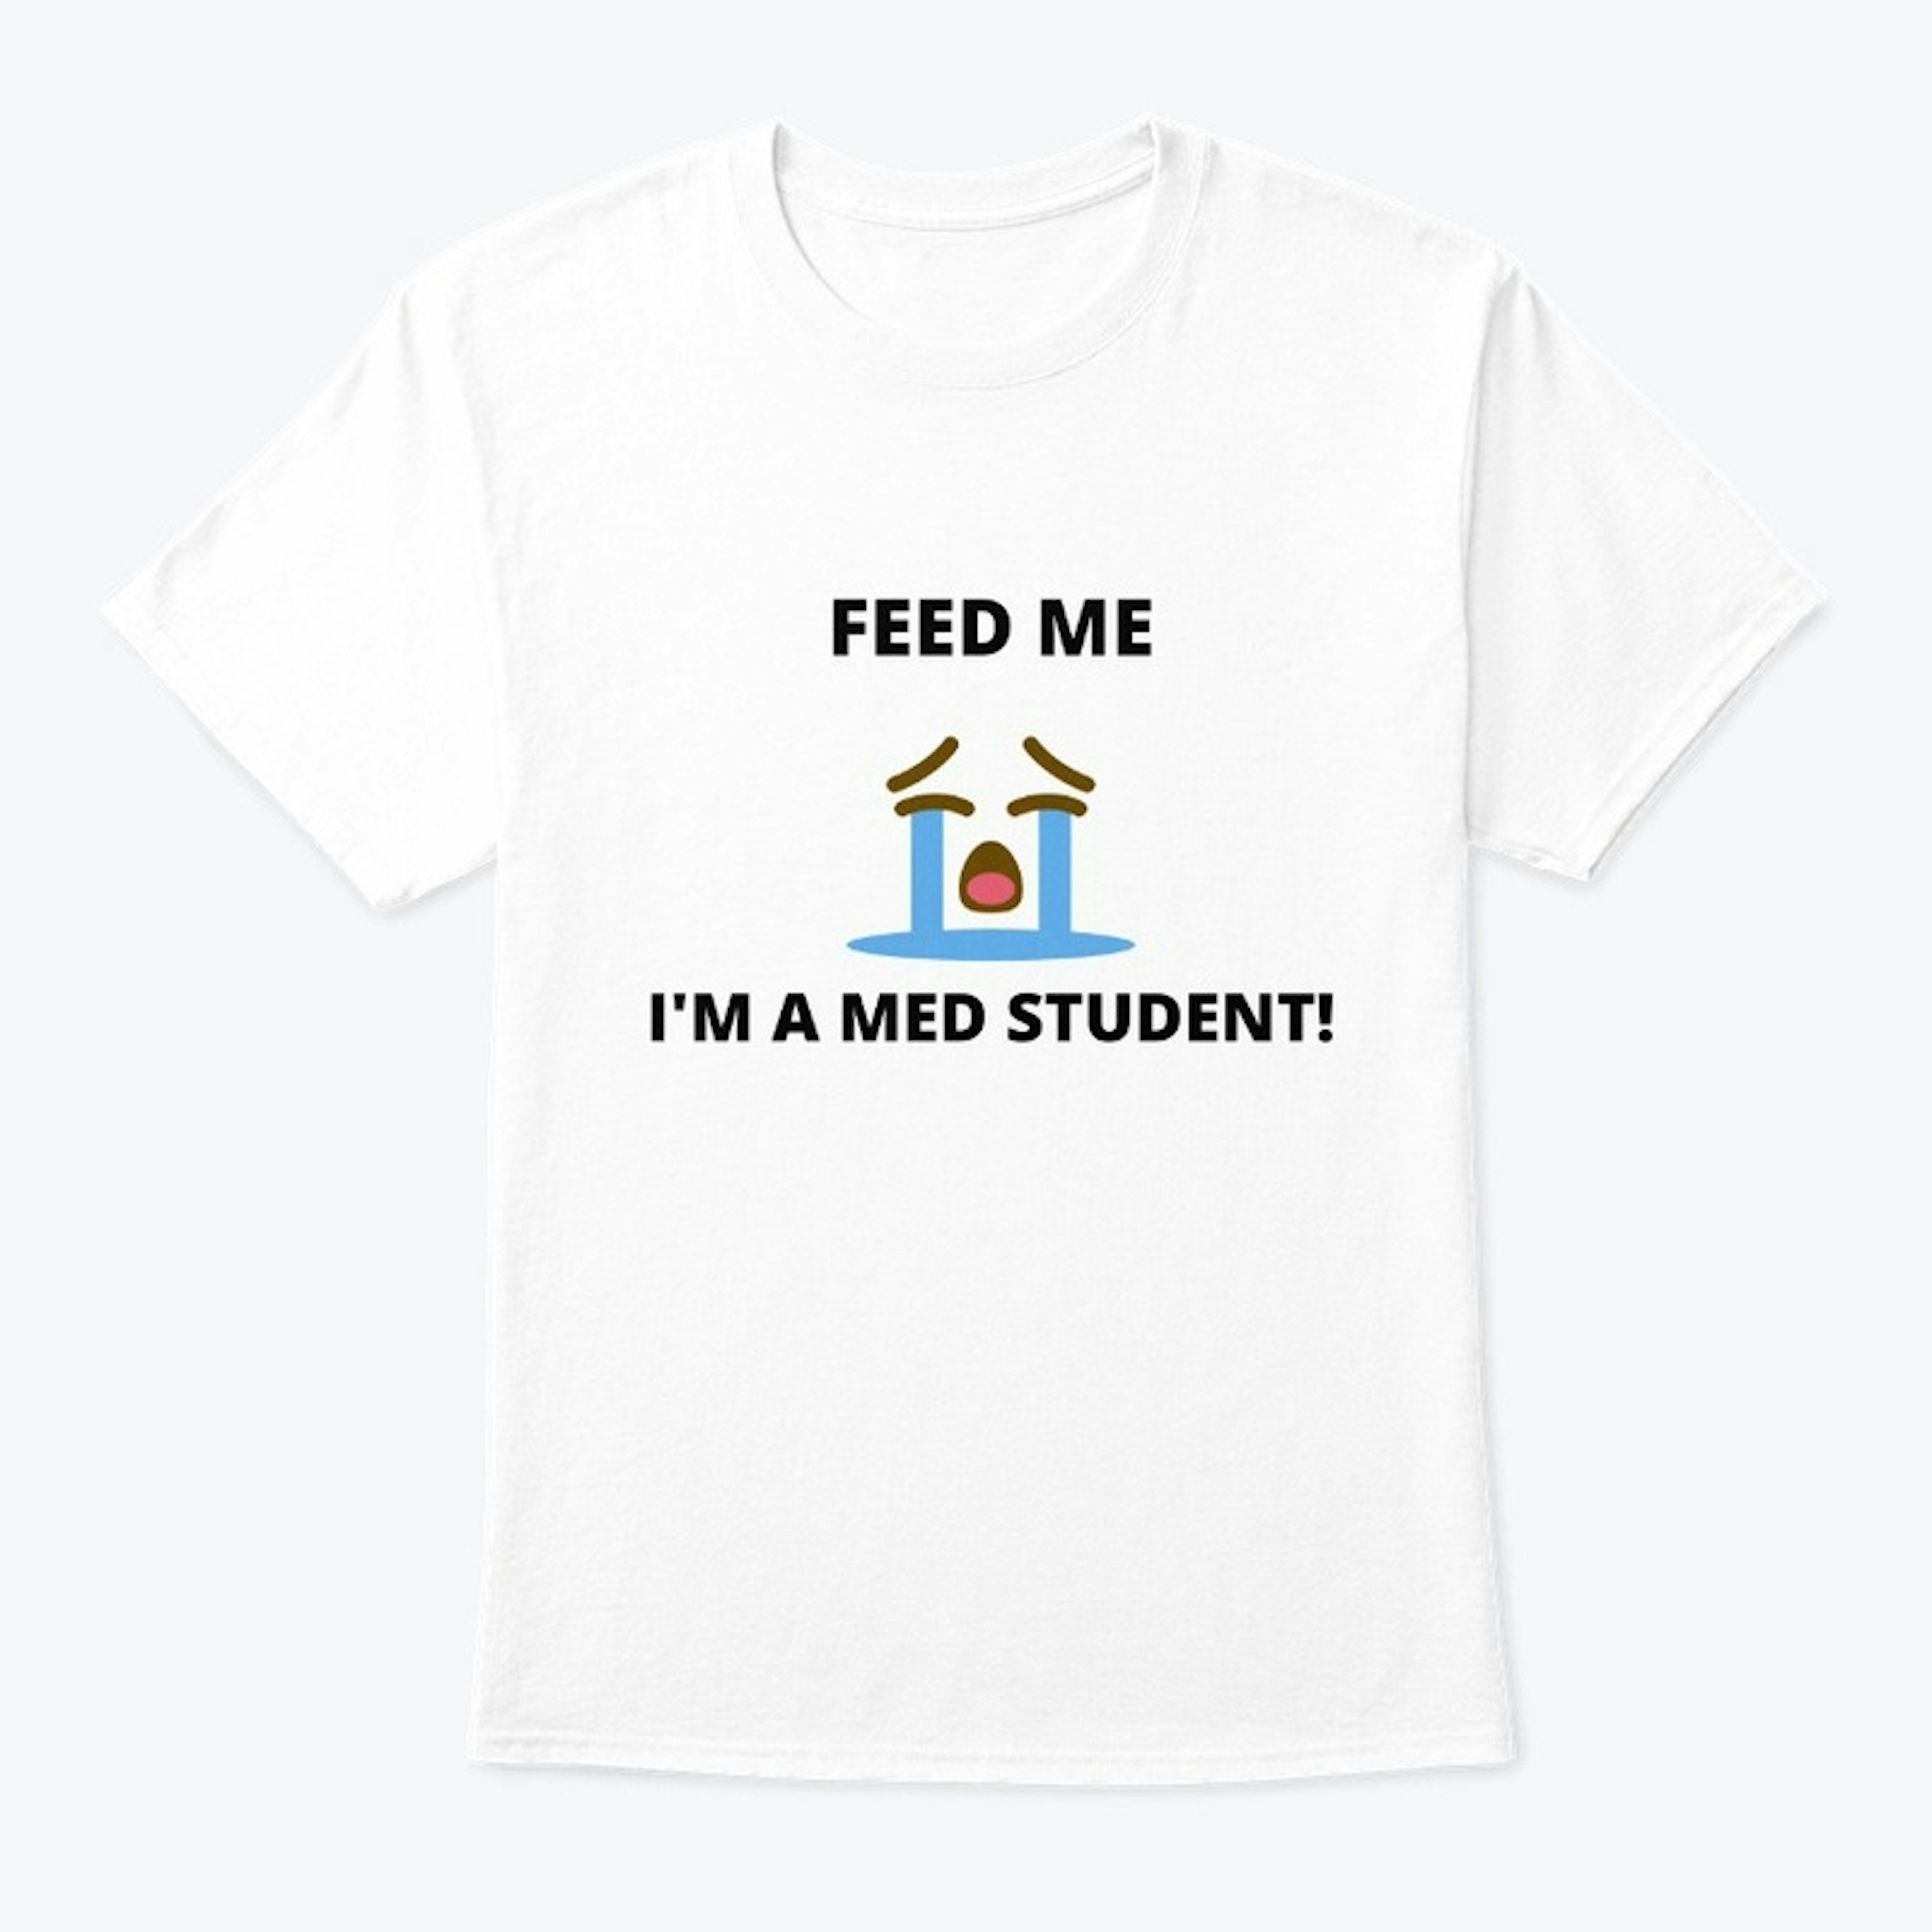 Feed me! I'm a Med Student!